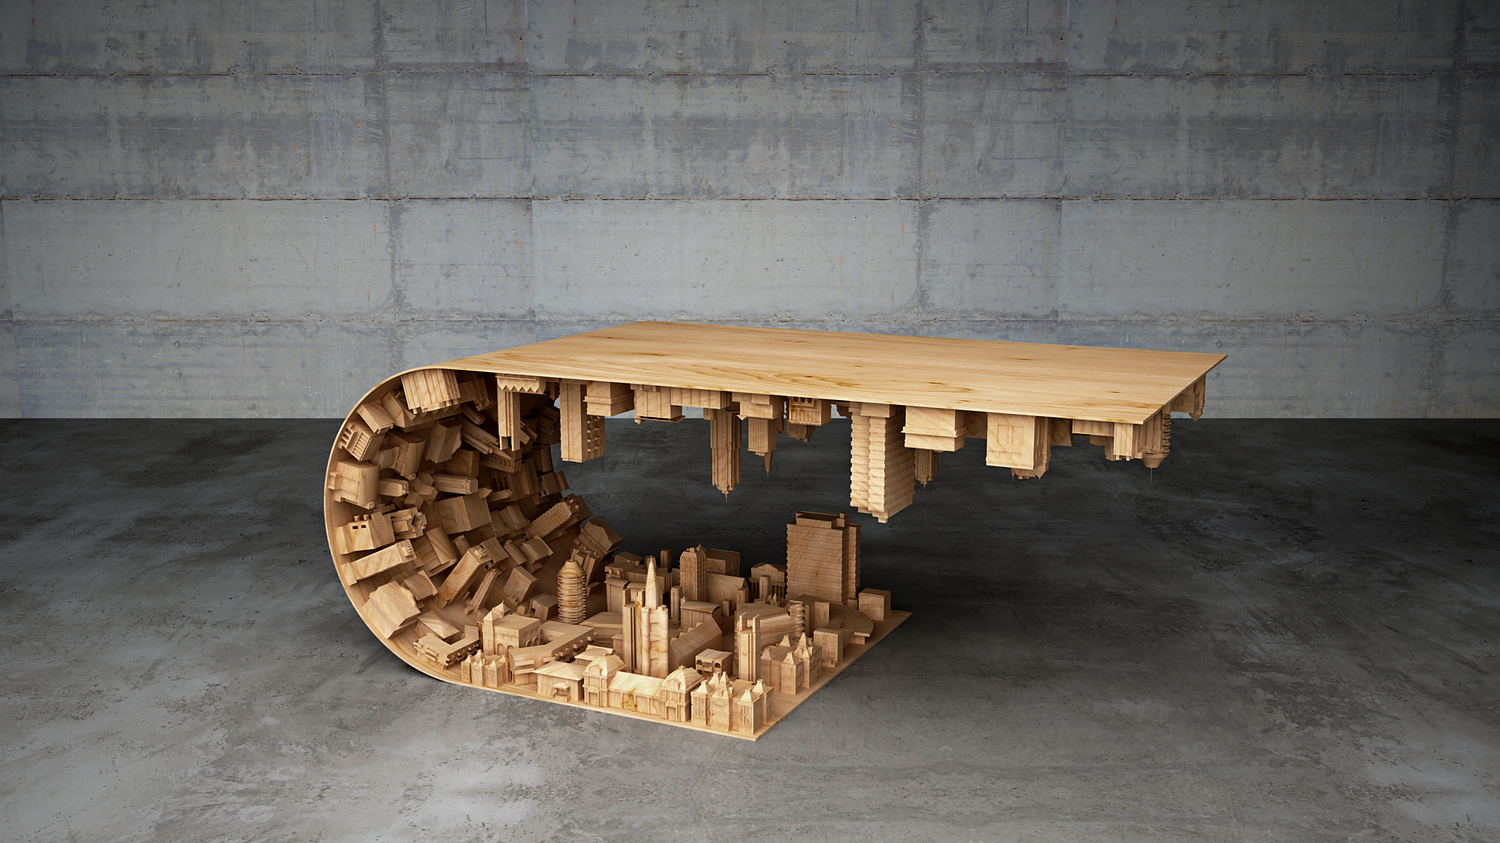 Stelios Mousarris, “Wave City Coffee Table”